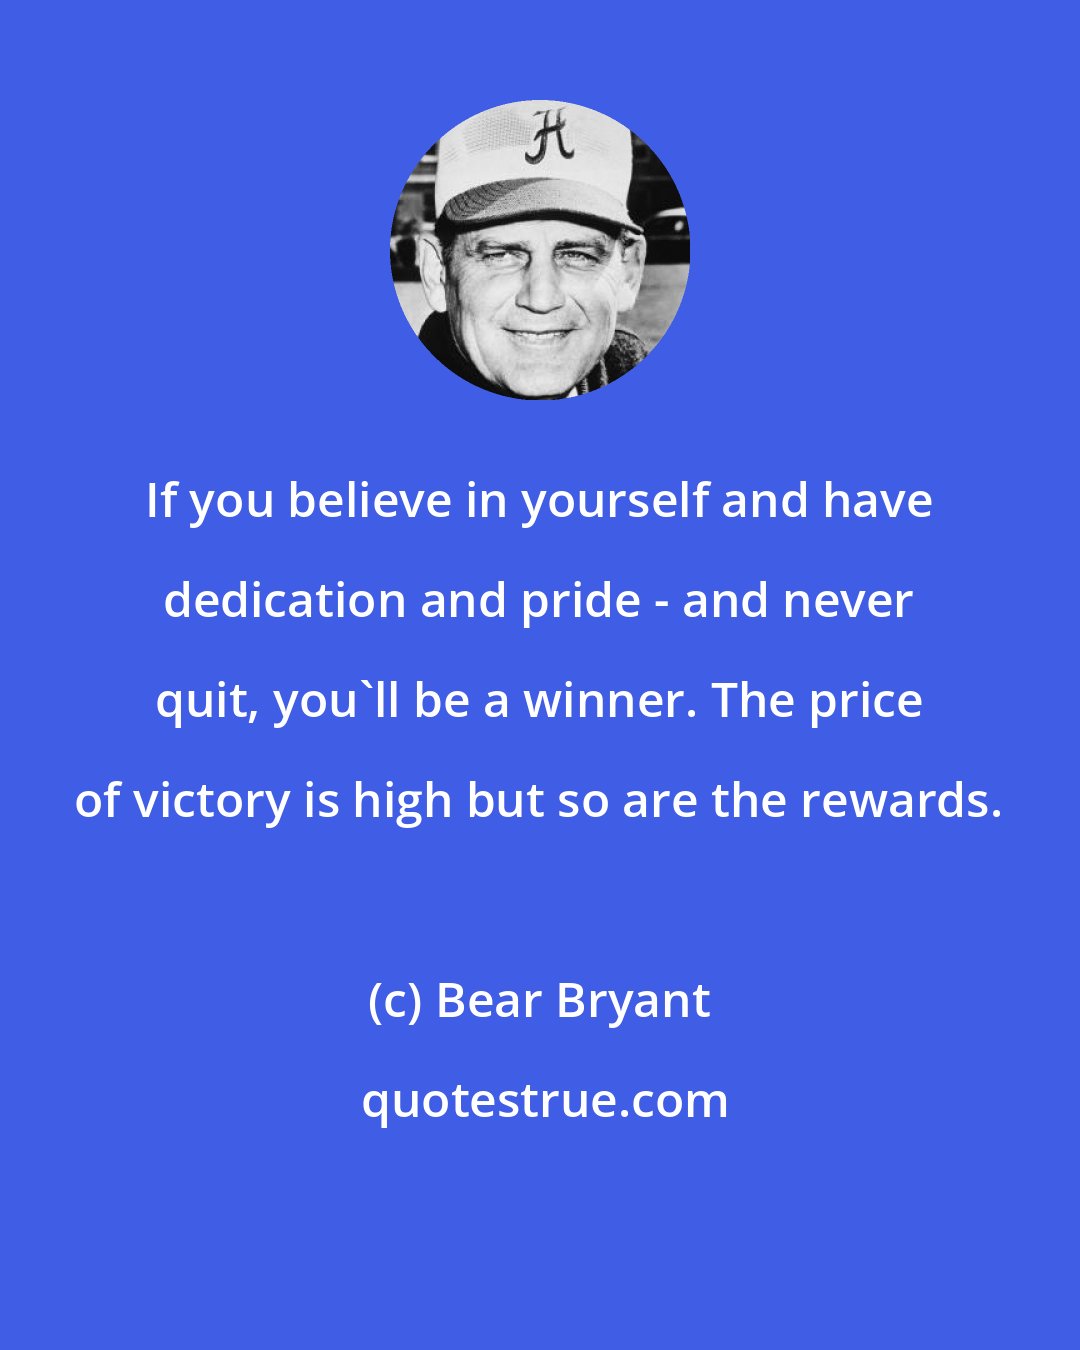 Bear Bryant: If you believe in yourself and have dedication and pride - and never quit, you'll be a winner. The price of victory is high but so are the rewards.